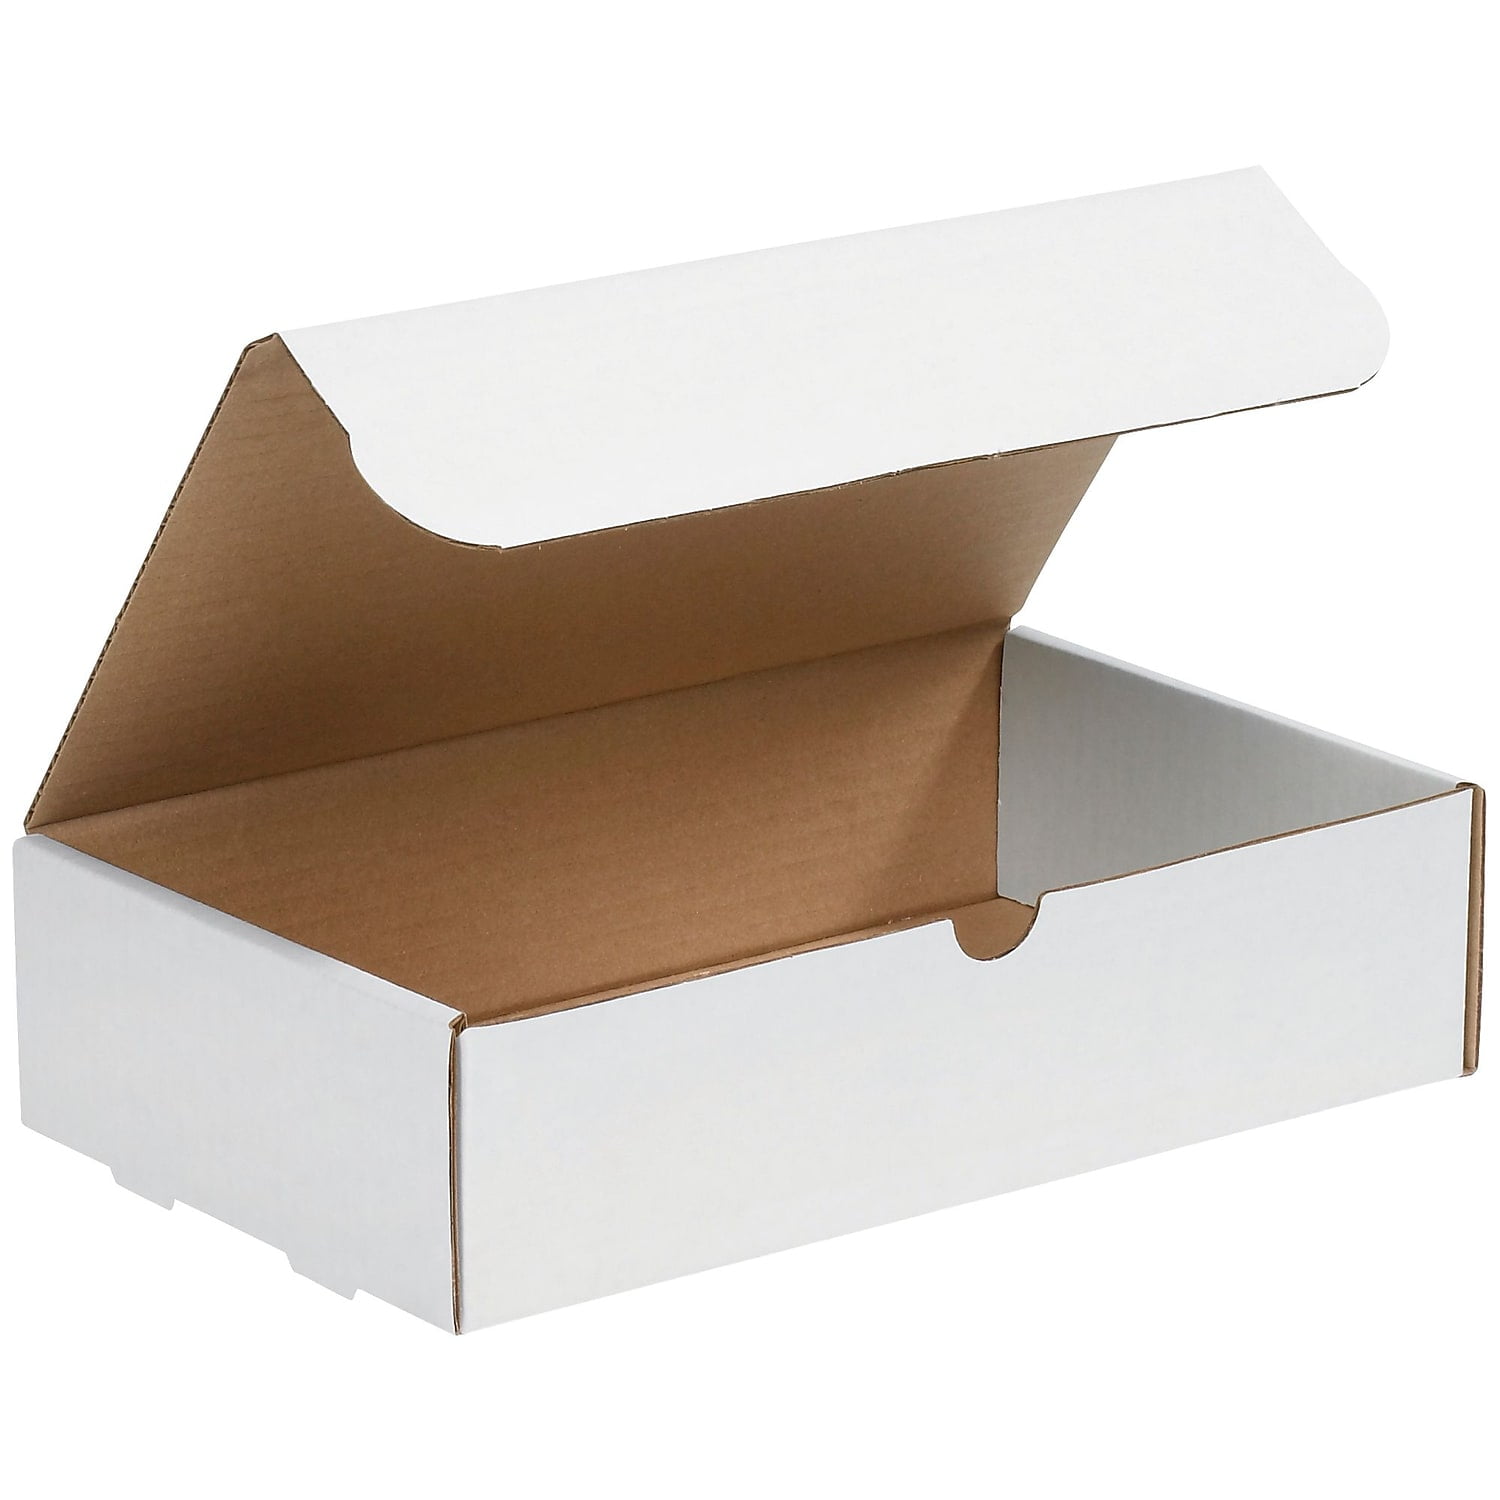 Packaging Supplies 200#/ECT-32-B Corrugated White Literature Mailers 50/BUNDLE 